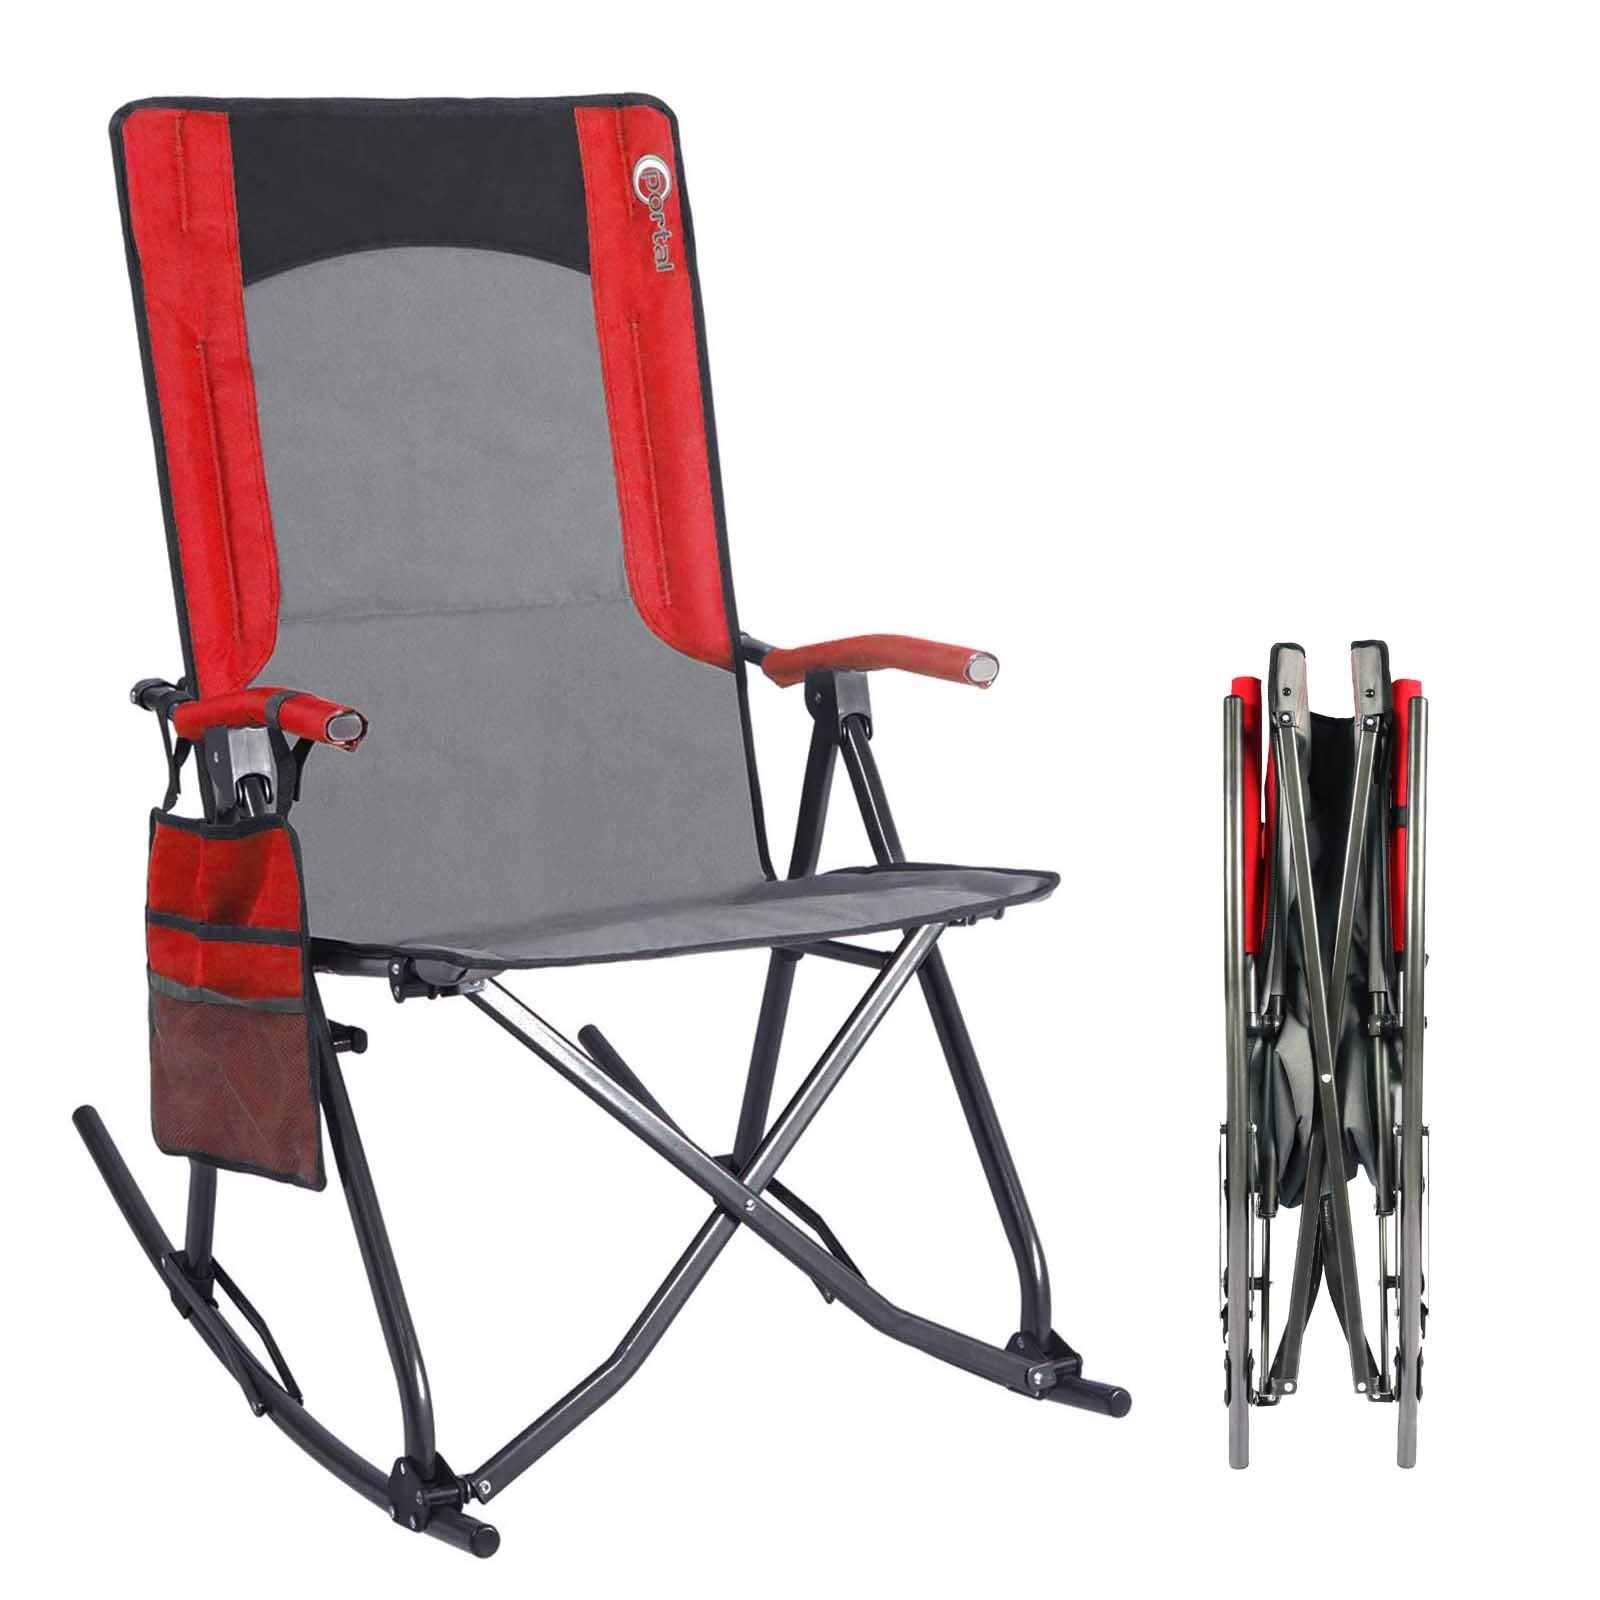 PORTAL Rocking Camping Chair Folding Portable Rocker Outdoor with Cup Holder for Patio, Lawn, Camp, RV, Support 300 lbs, RED